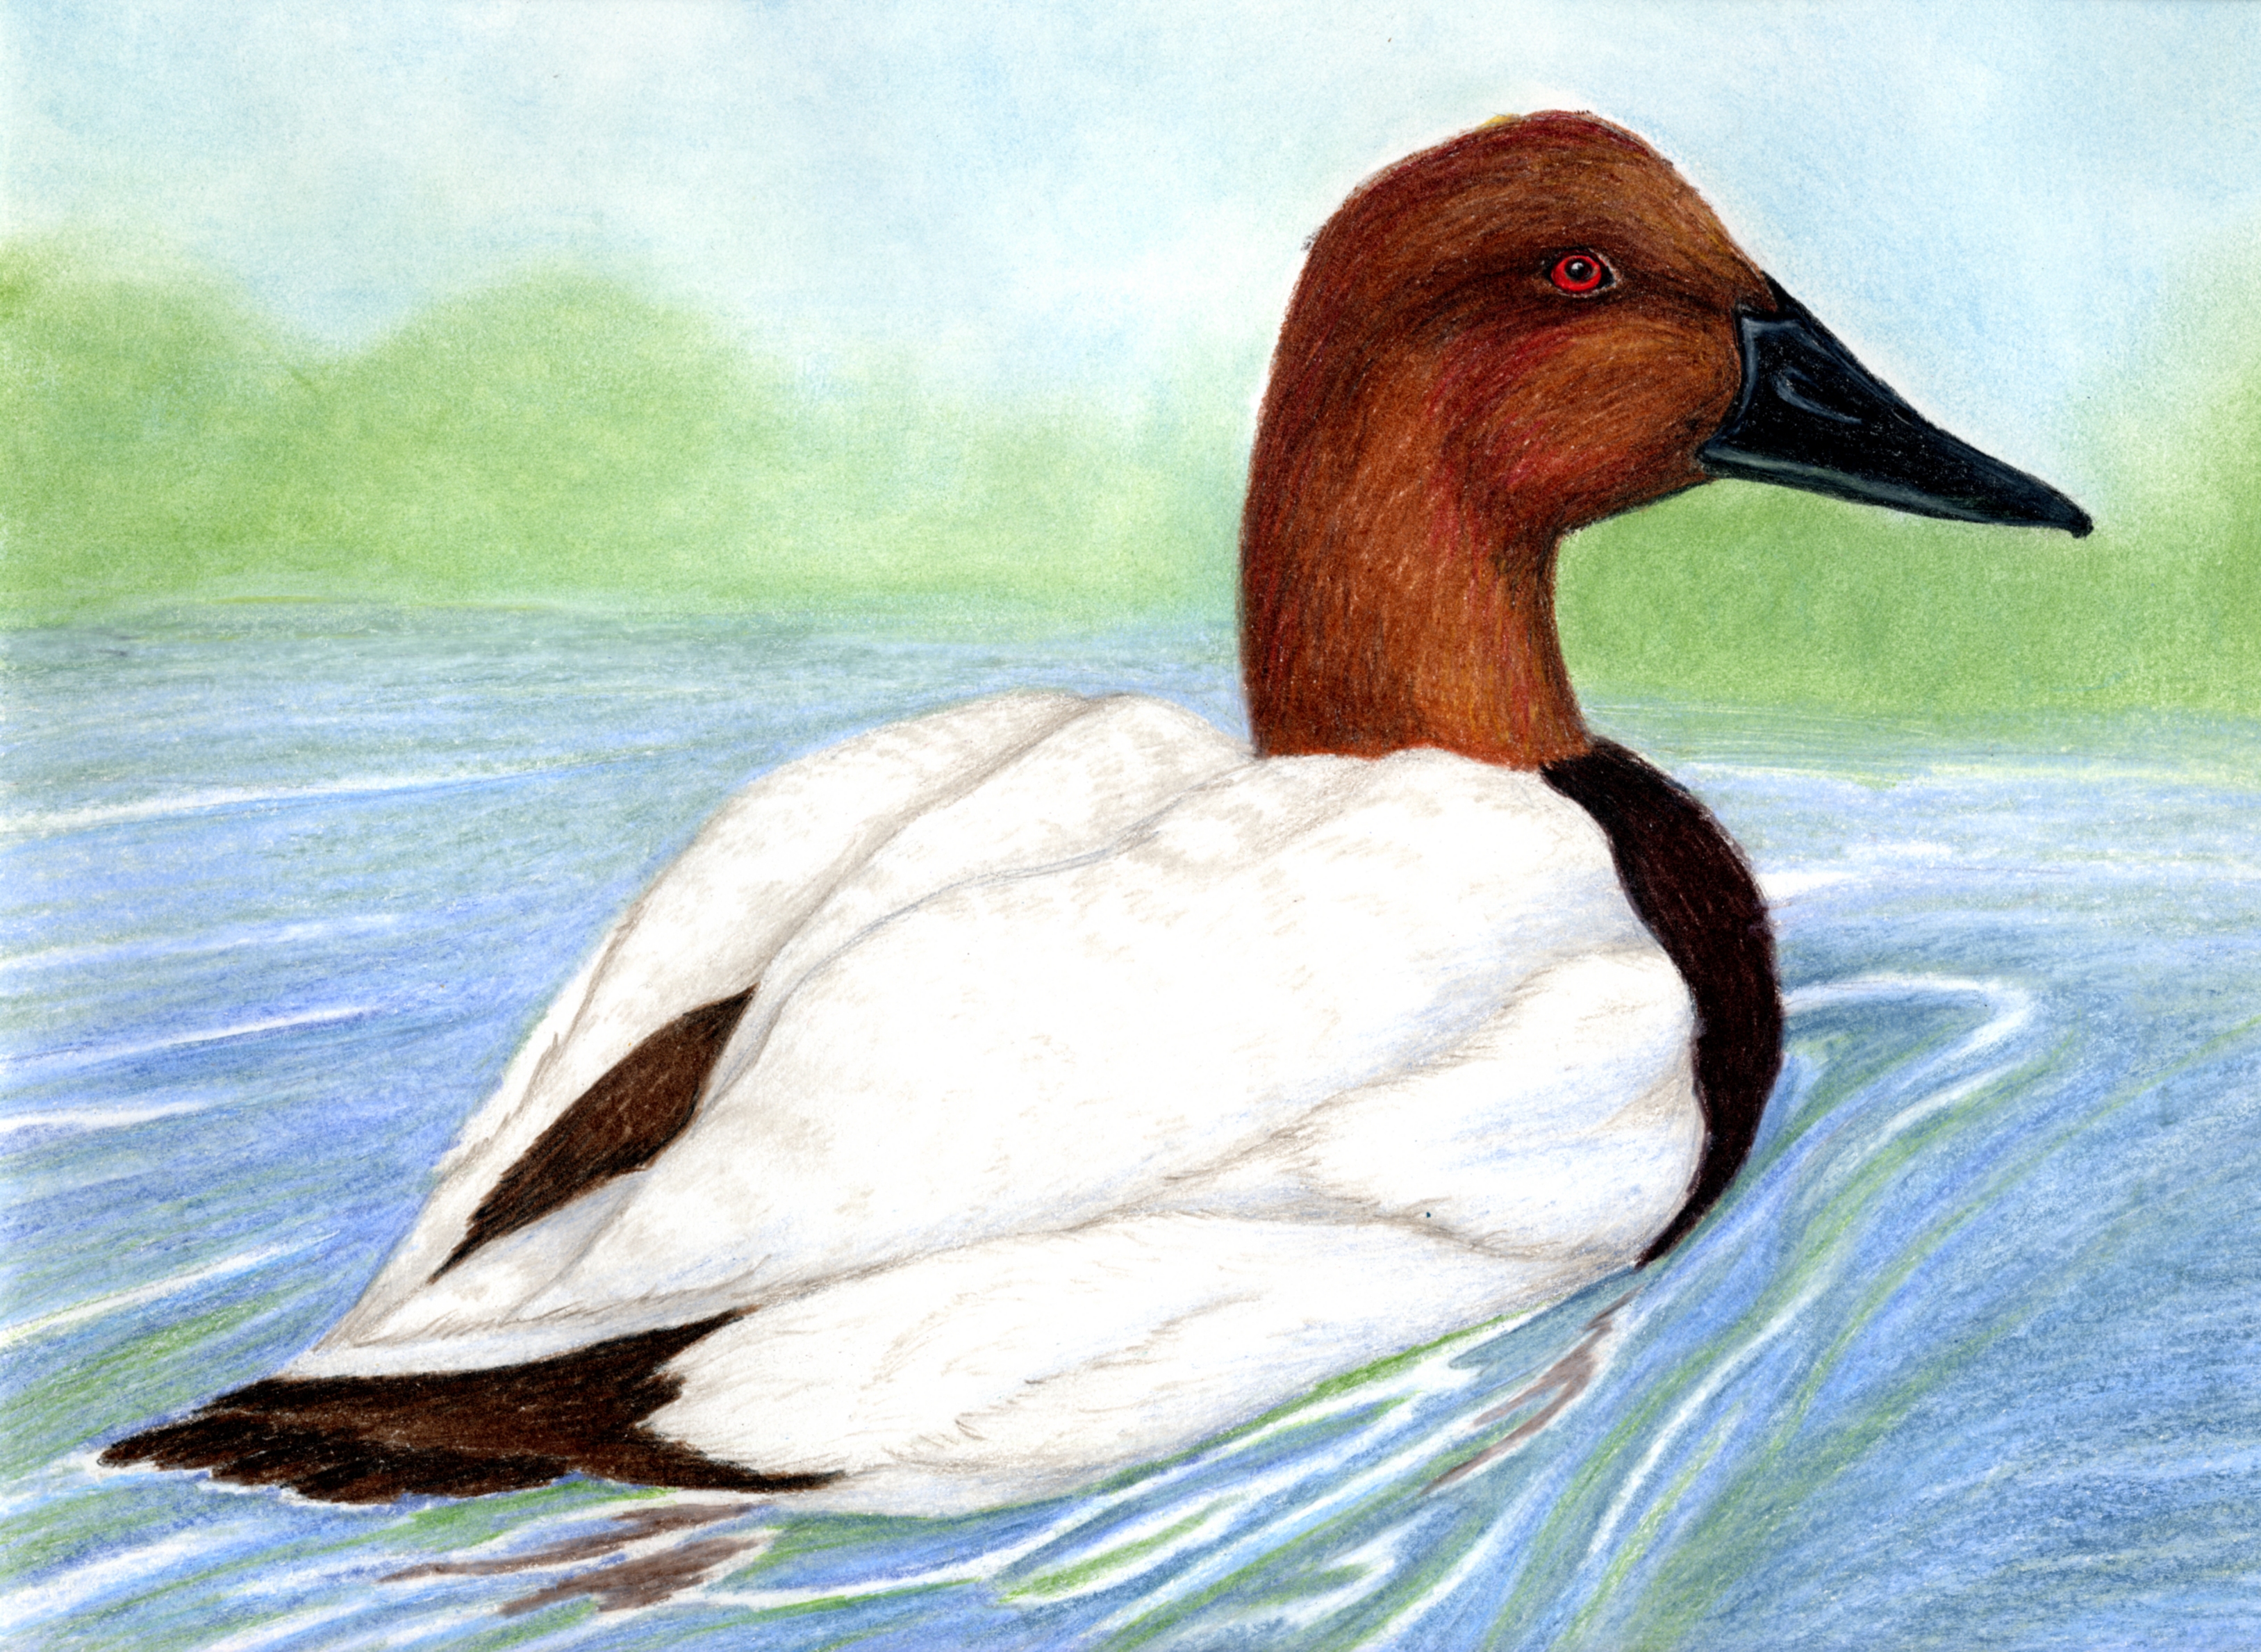 The finalist from Kentucky for the 2011 Junior Duck Stamp Art Contest. (5609798907)